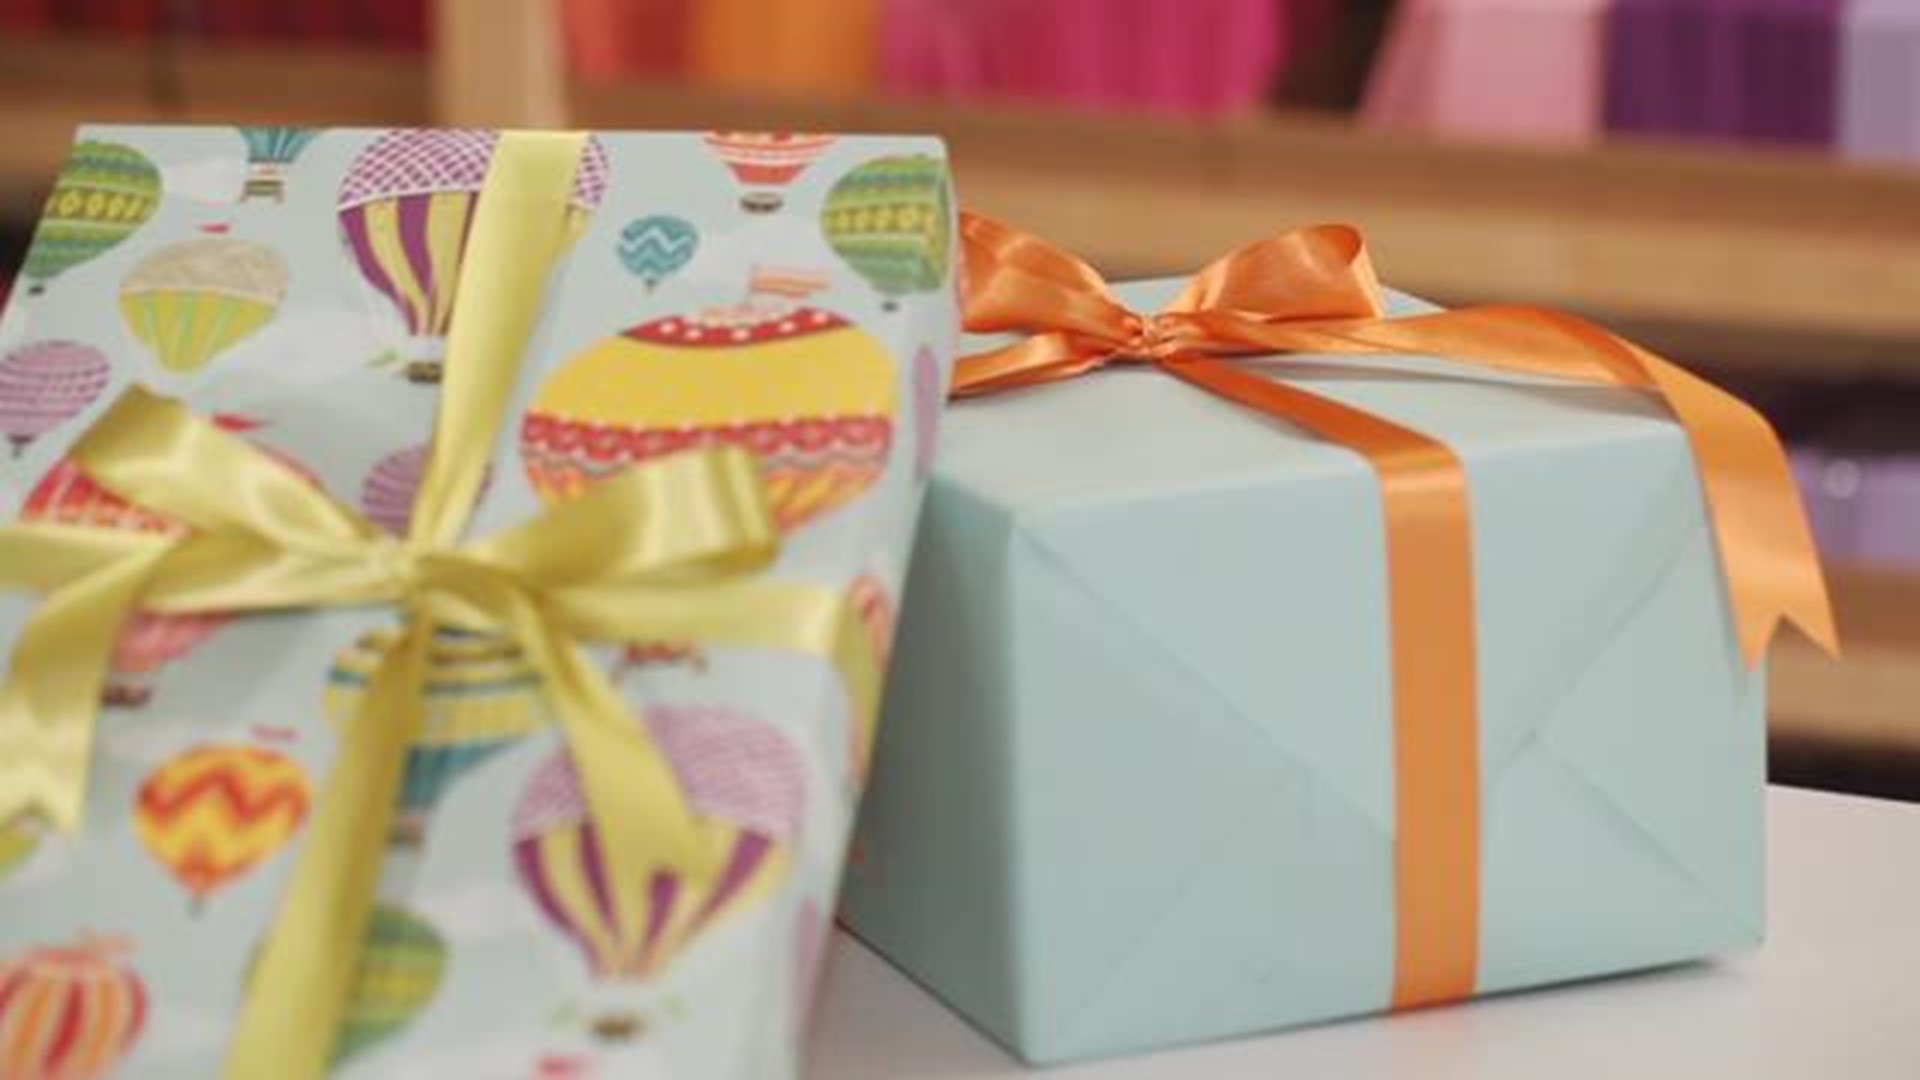 Think outside the box with these 6 creative gift wrapping ideas!